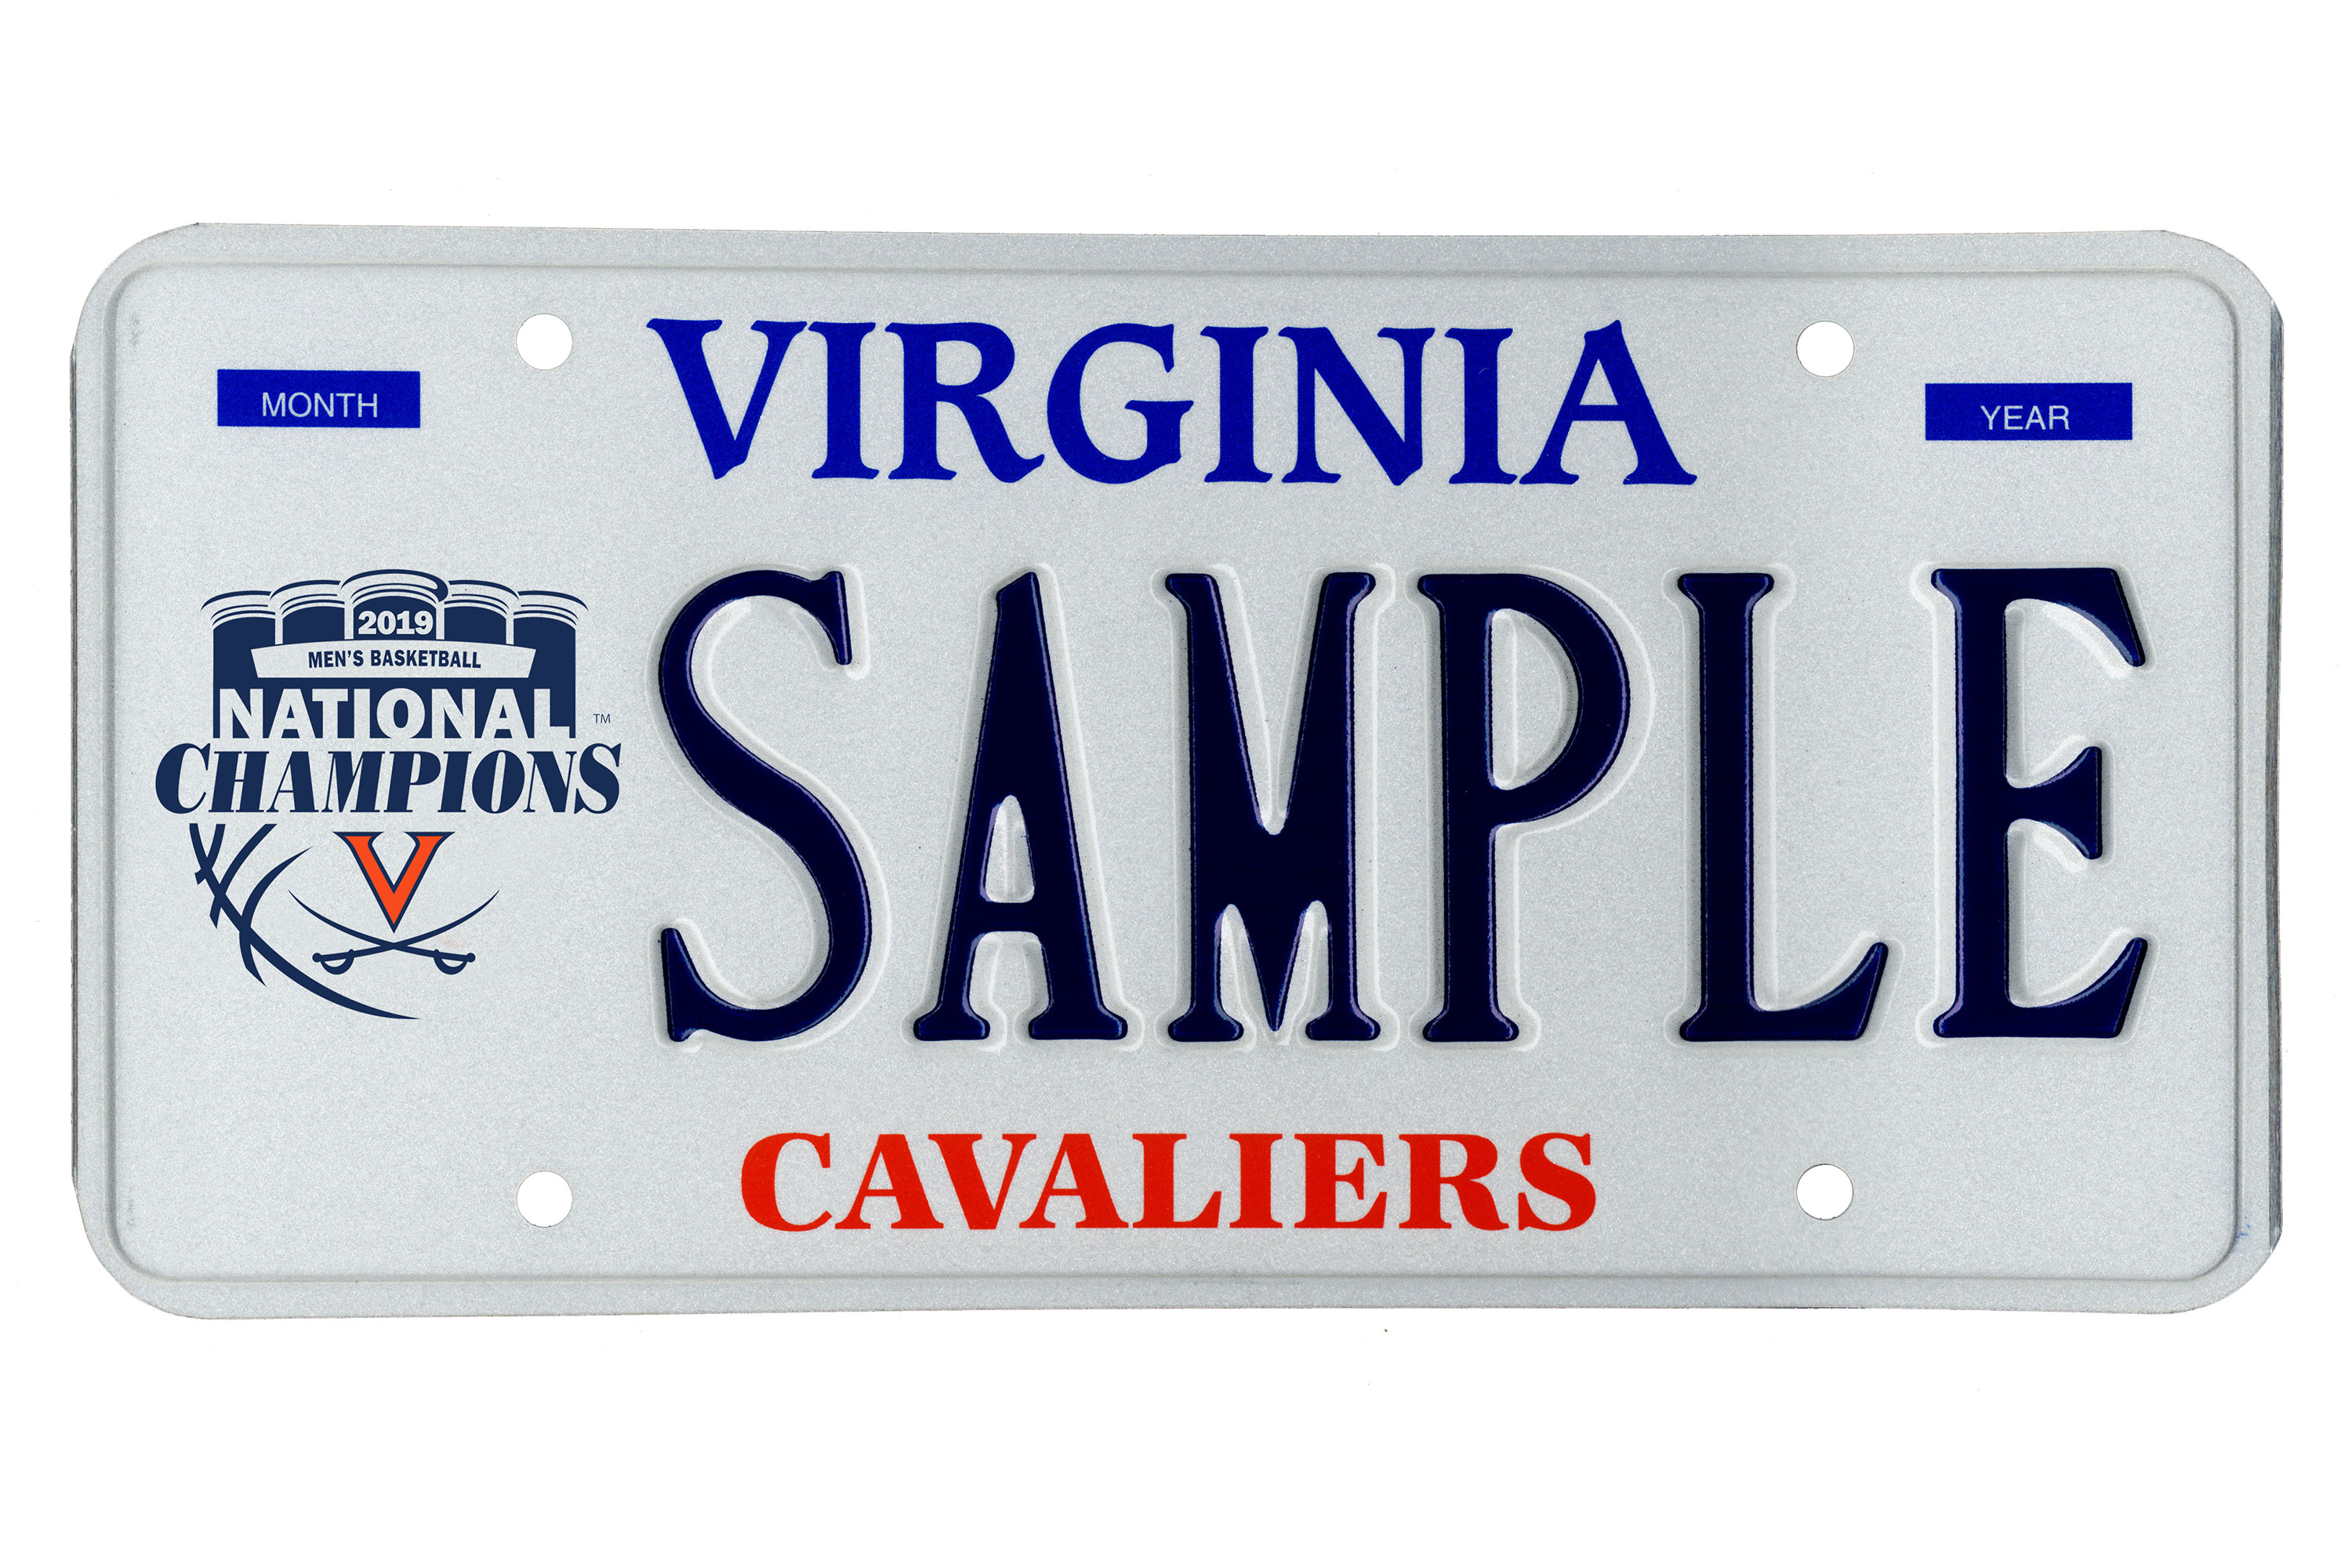 Virginia Licence plate have V saber logo with the text 2019 Men's Basketball National Champions and on the bottom middle of the plate it says Cavaliers